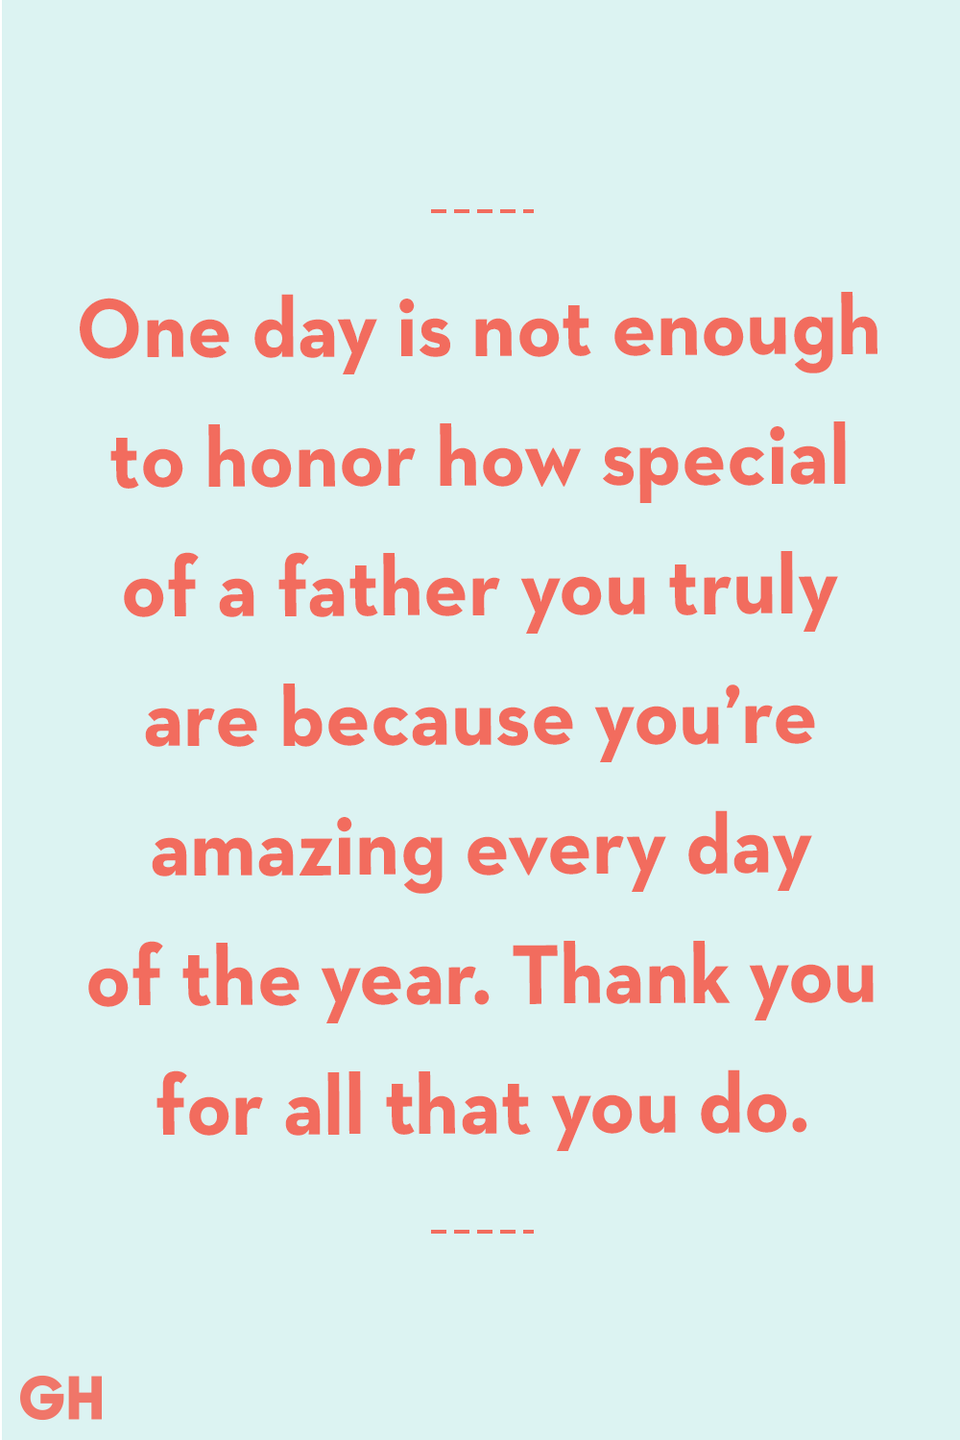 <p>One day is not enough to honor how special of a father you truly are because you’re amazing every day of the year. Thank you for all that you do.</p>